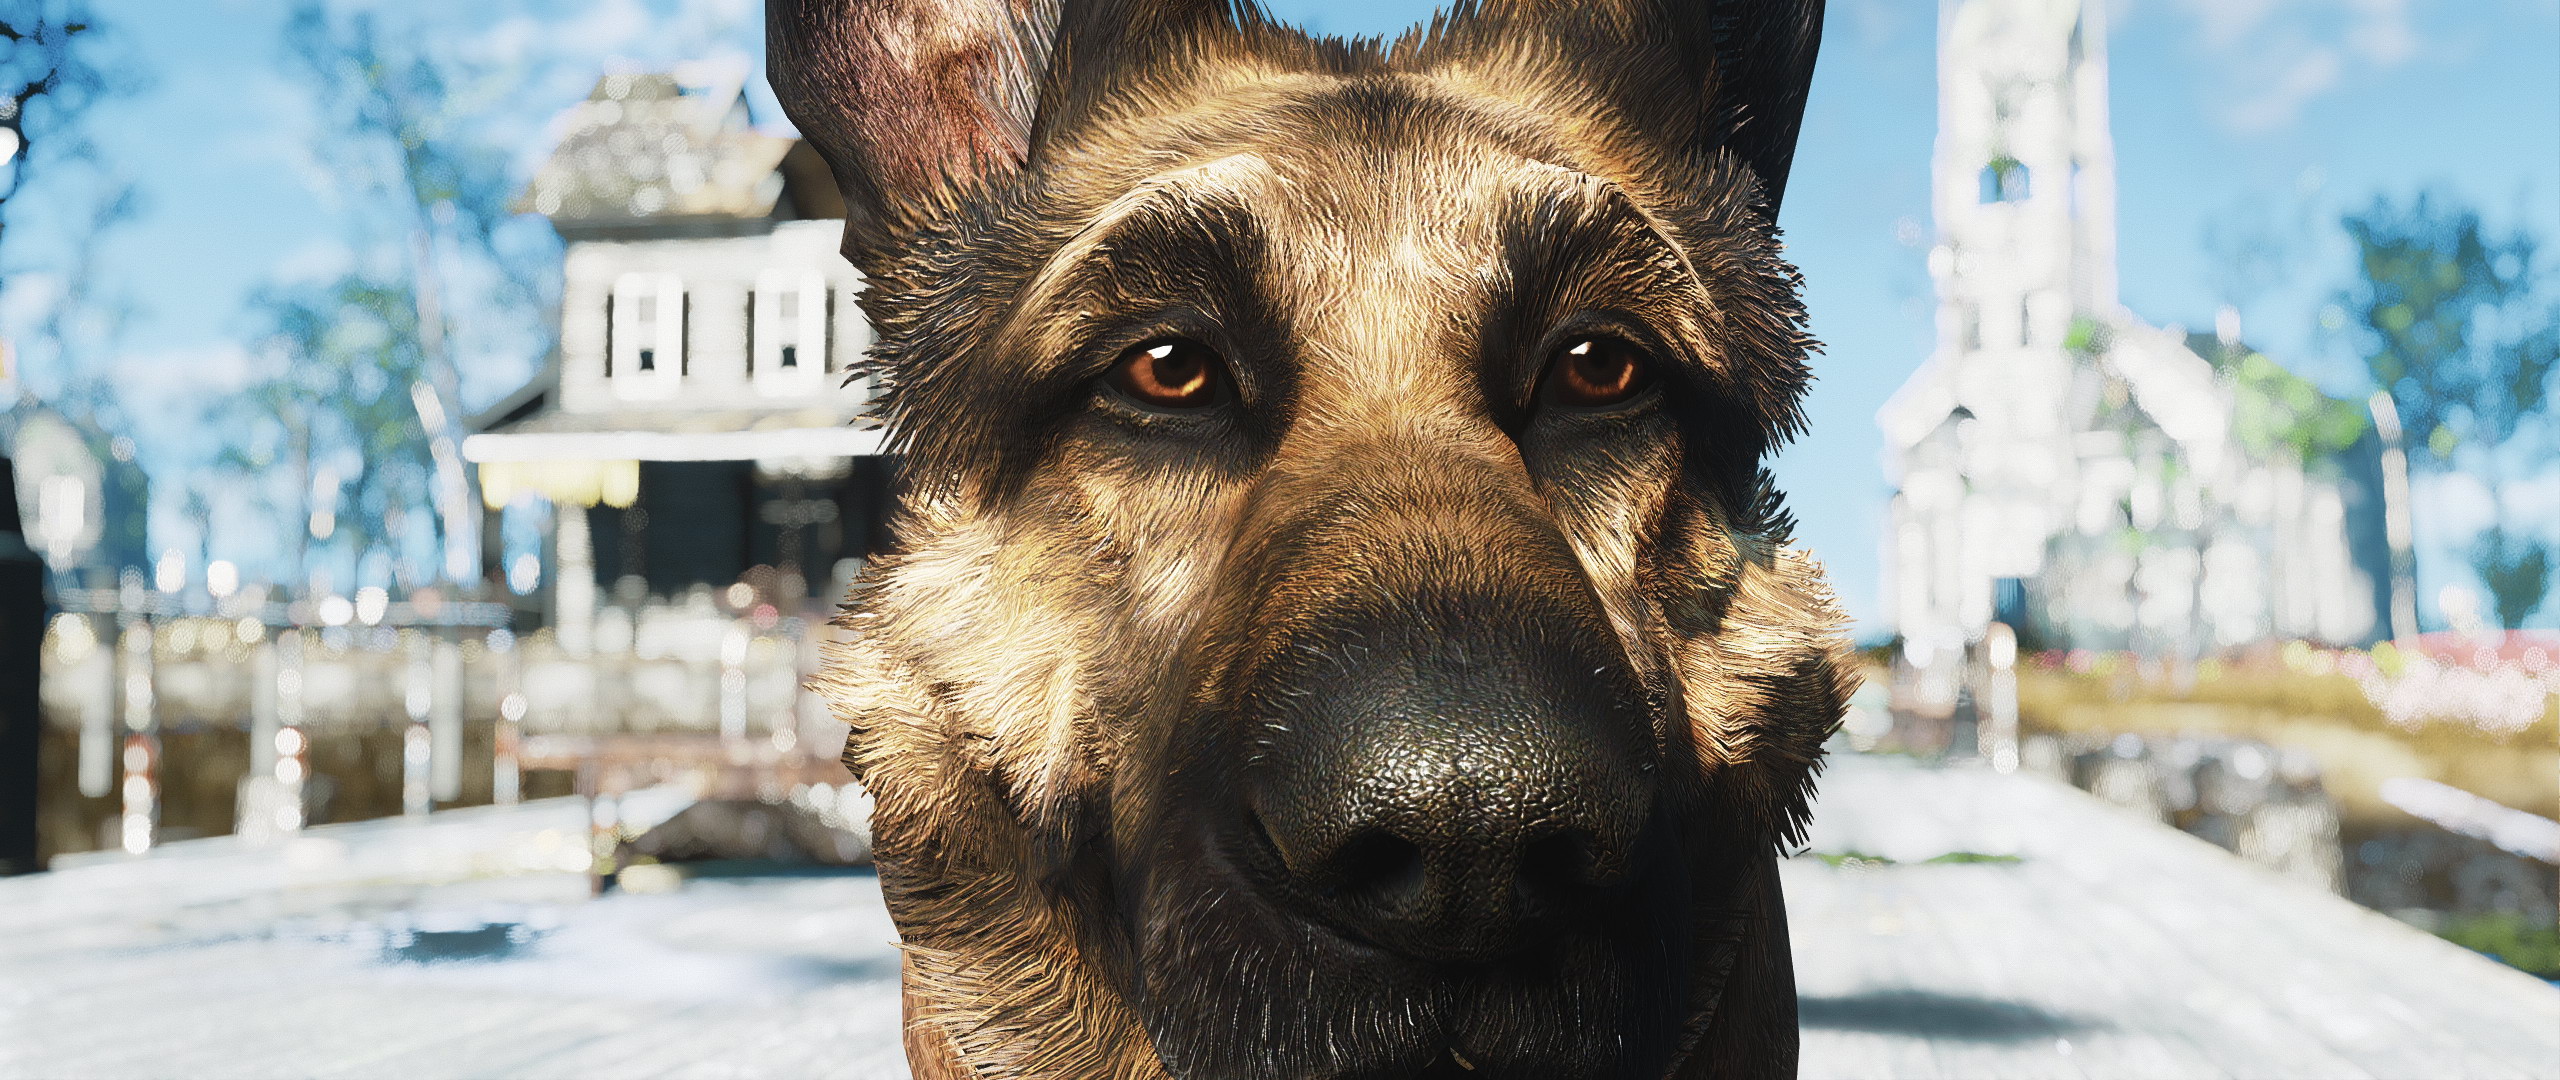 Dogmeat Wallpapers